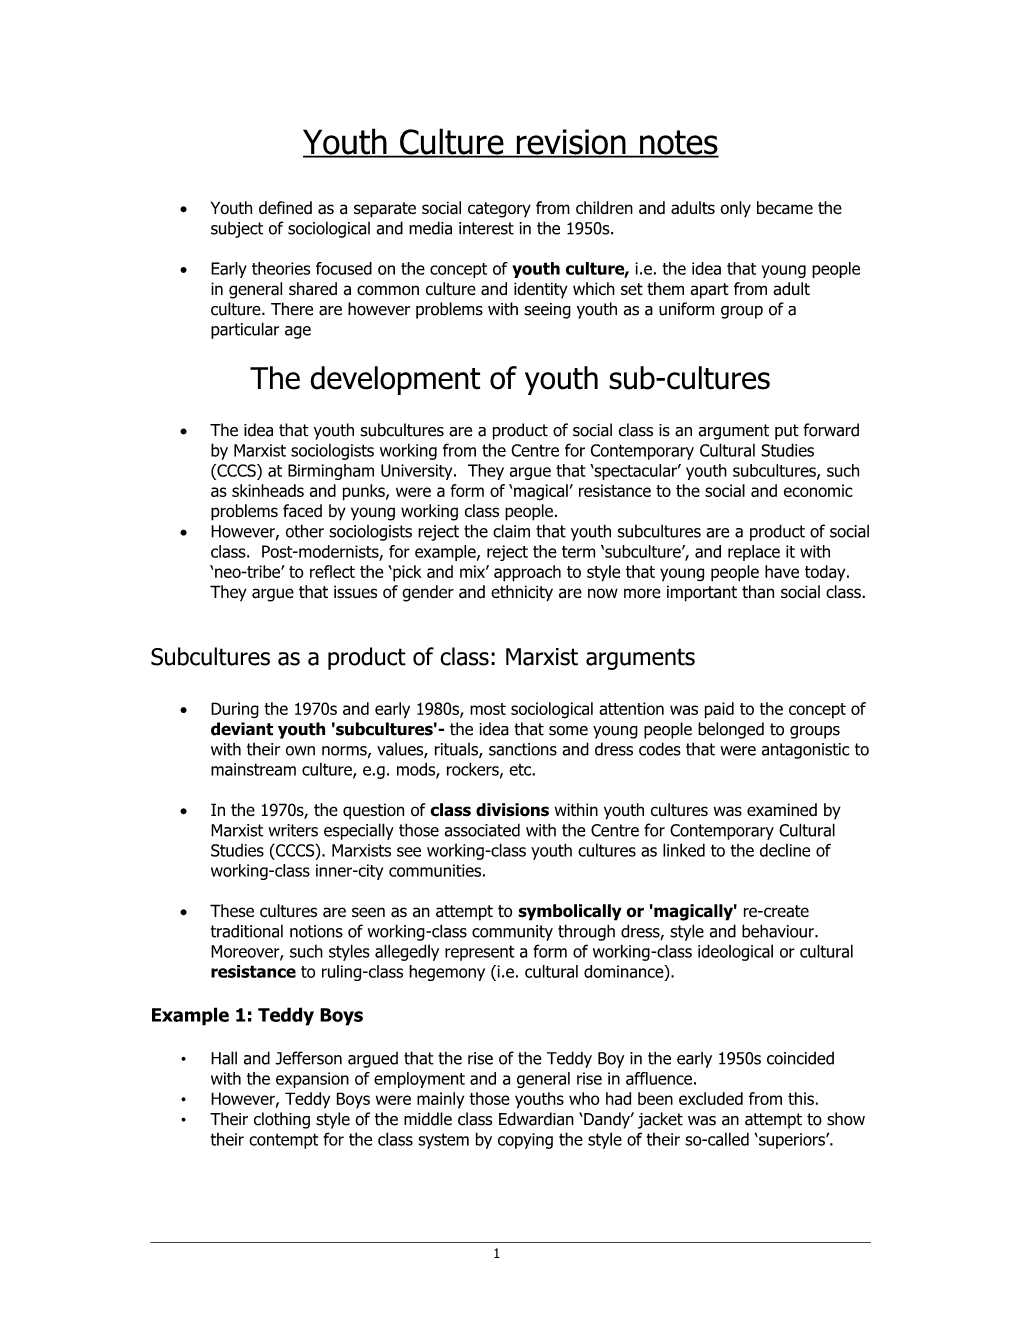 Section 1:Youth Culture and Sub-Cultures